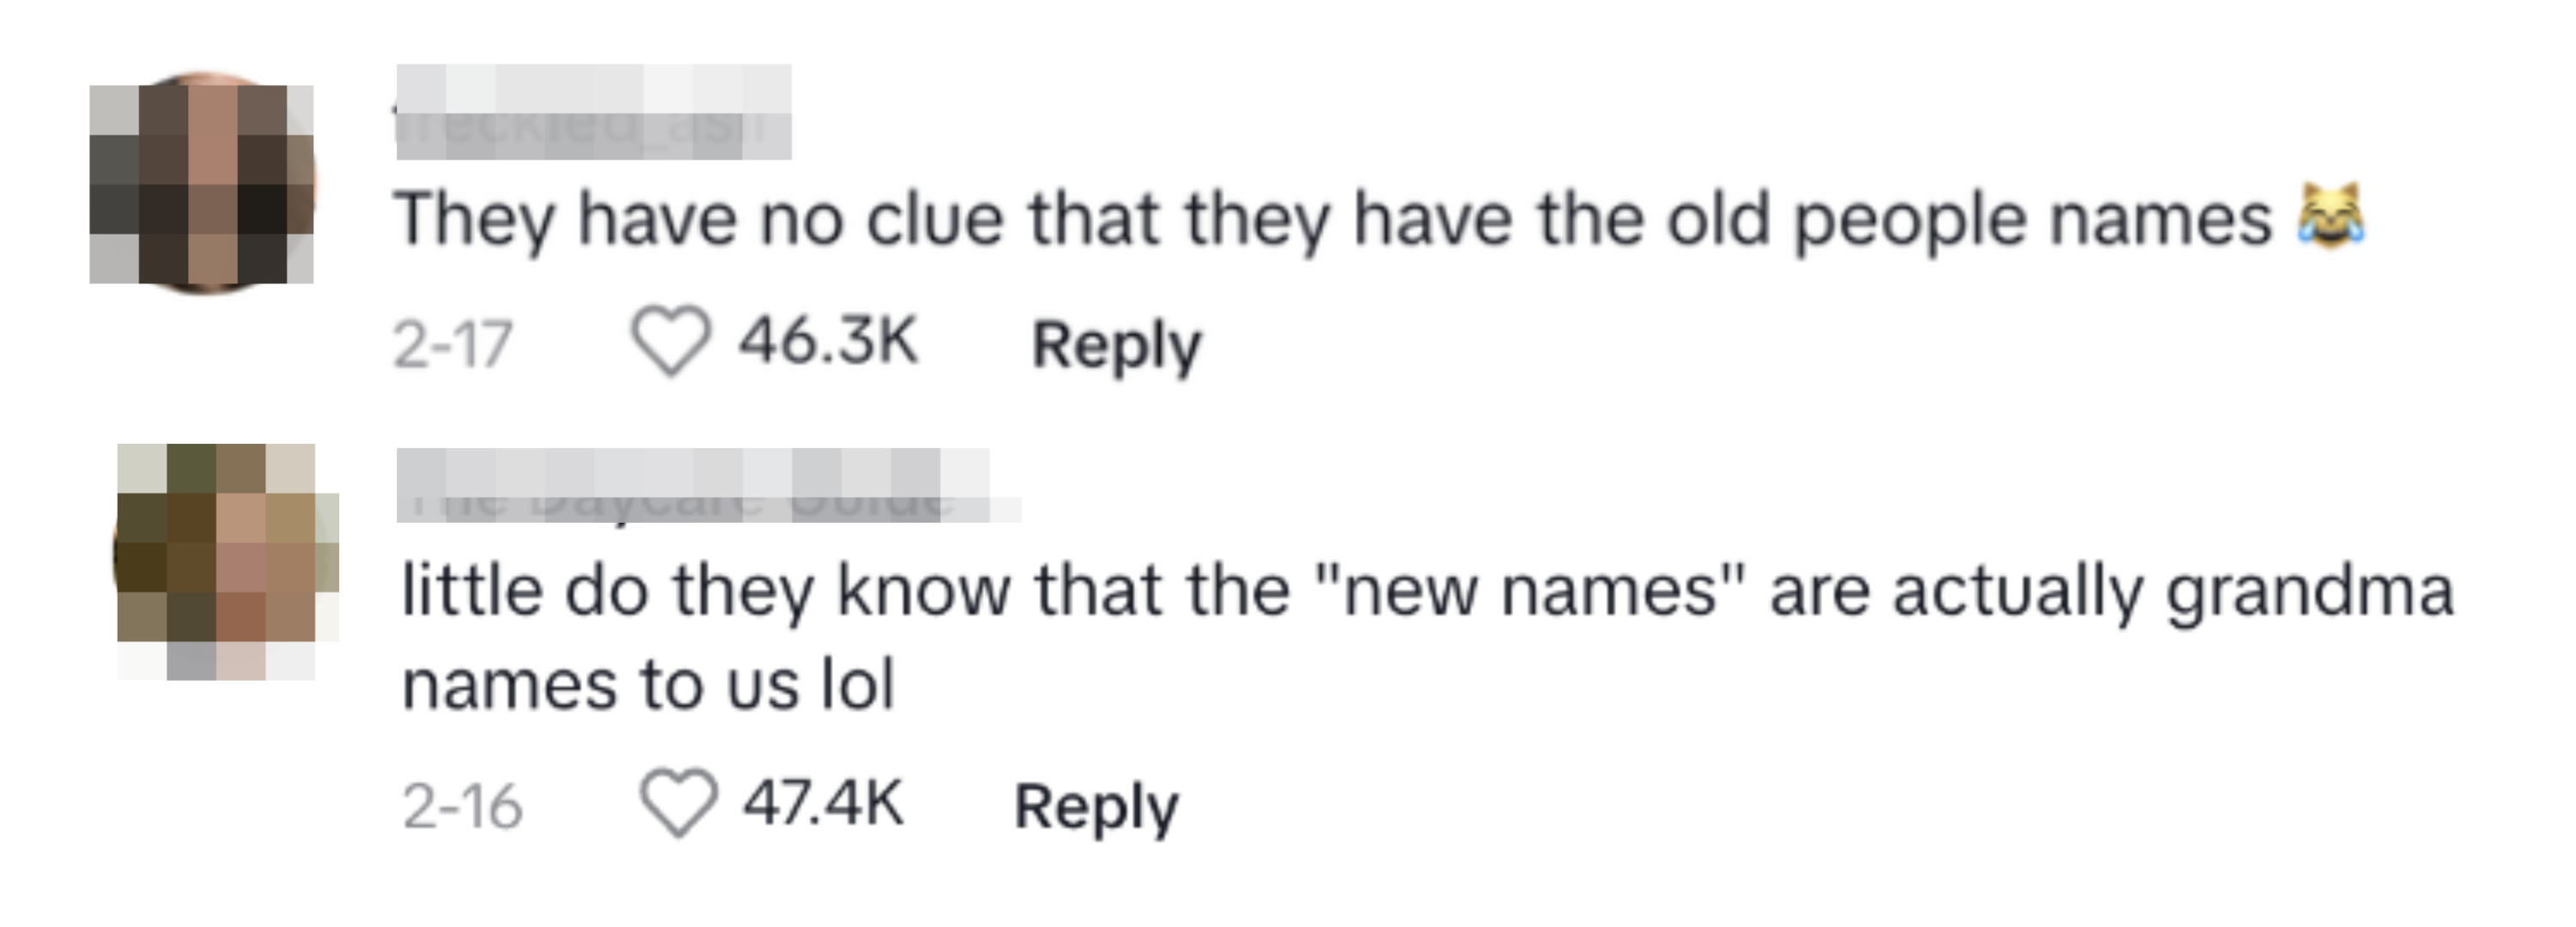 Two user comments on social media joking about old people names being considered new names